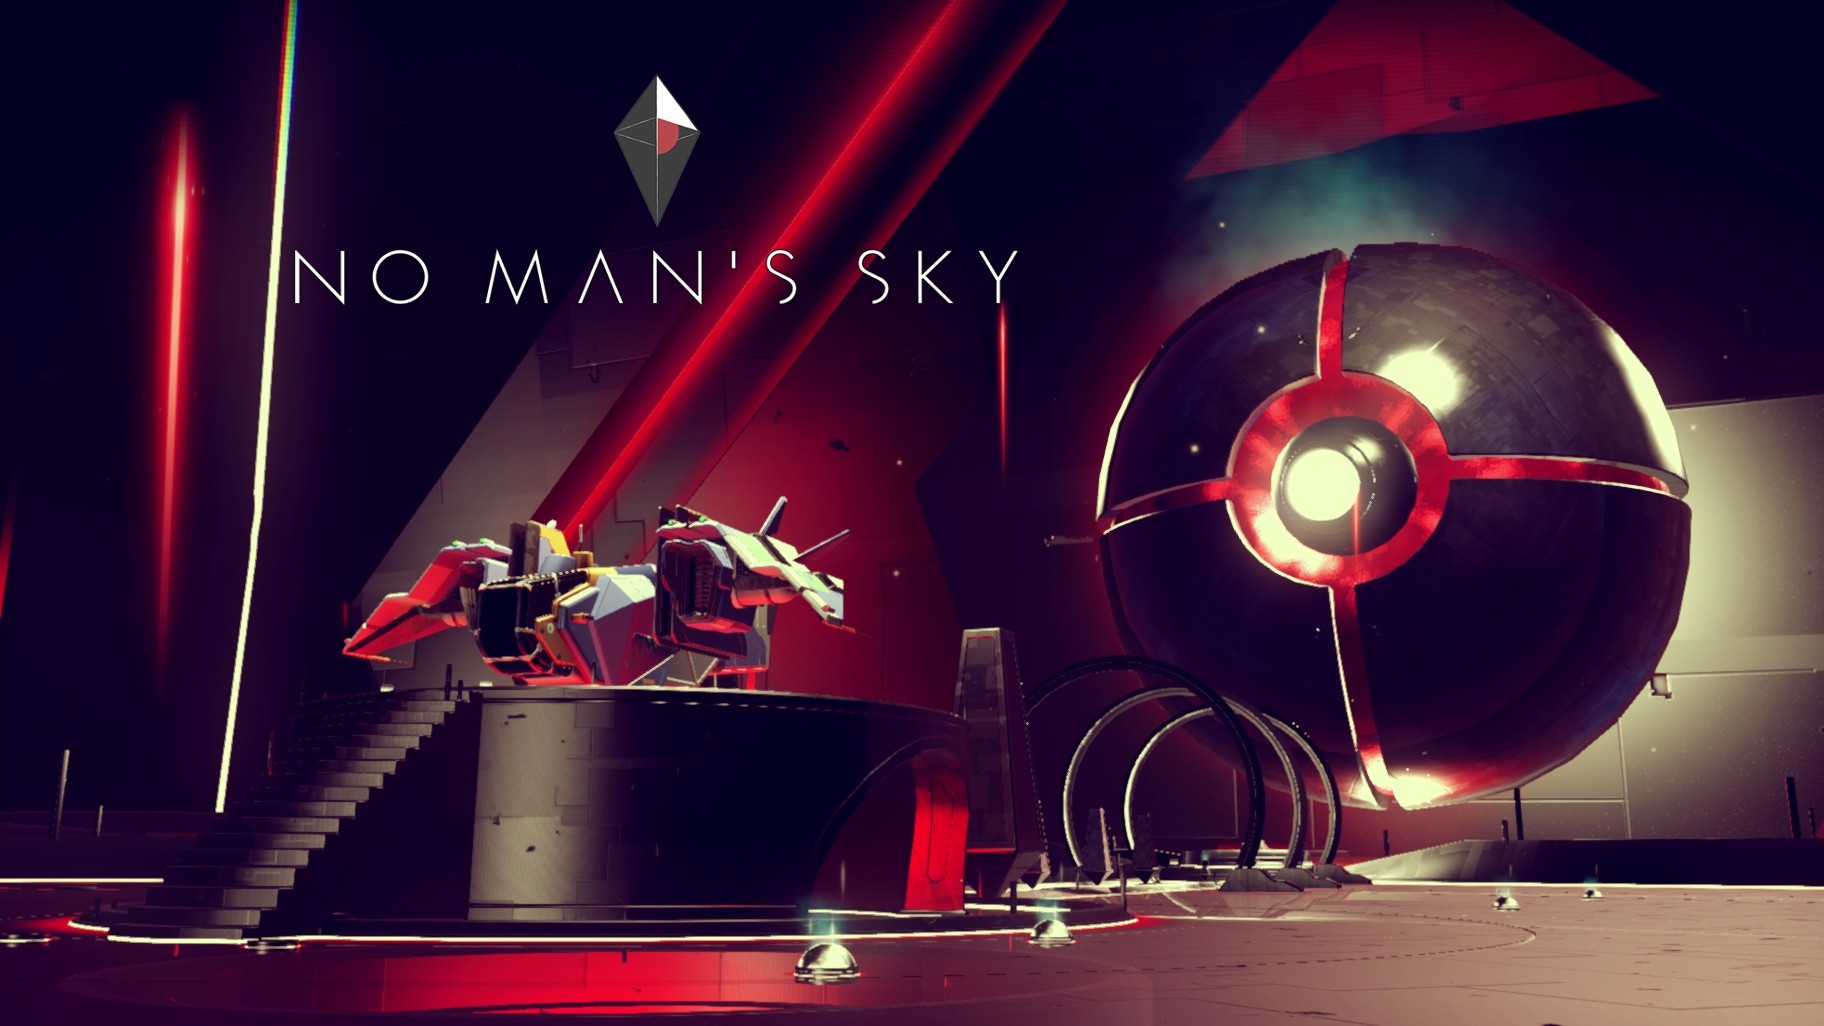 General 1824x1026 No Man's Sky video games video game art red